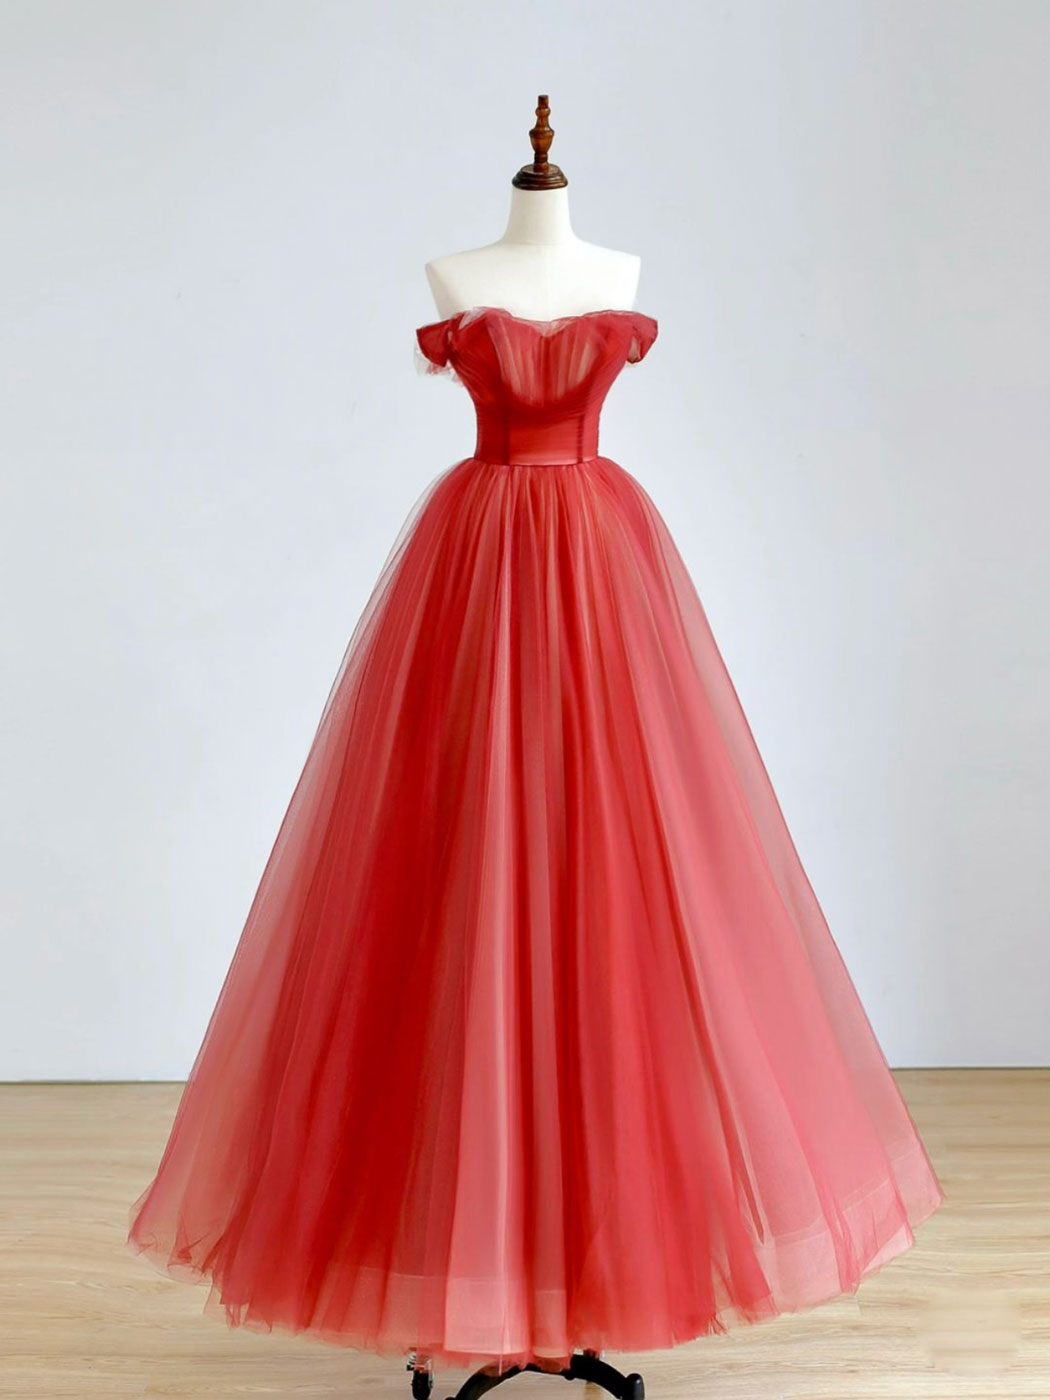 Red A-Line Long Prom Dress Outfits For Girls, Red Tulle Formal Graduation Dresses